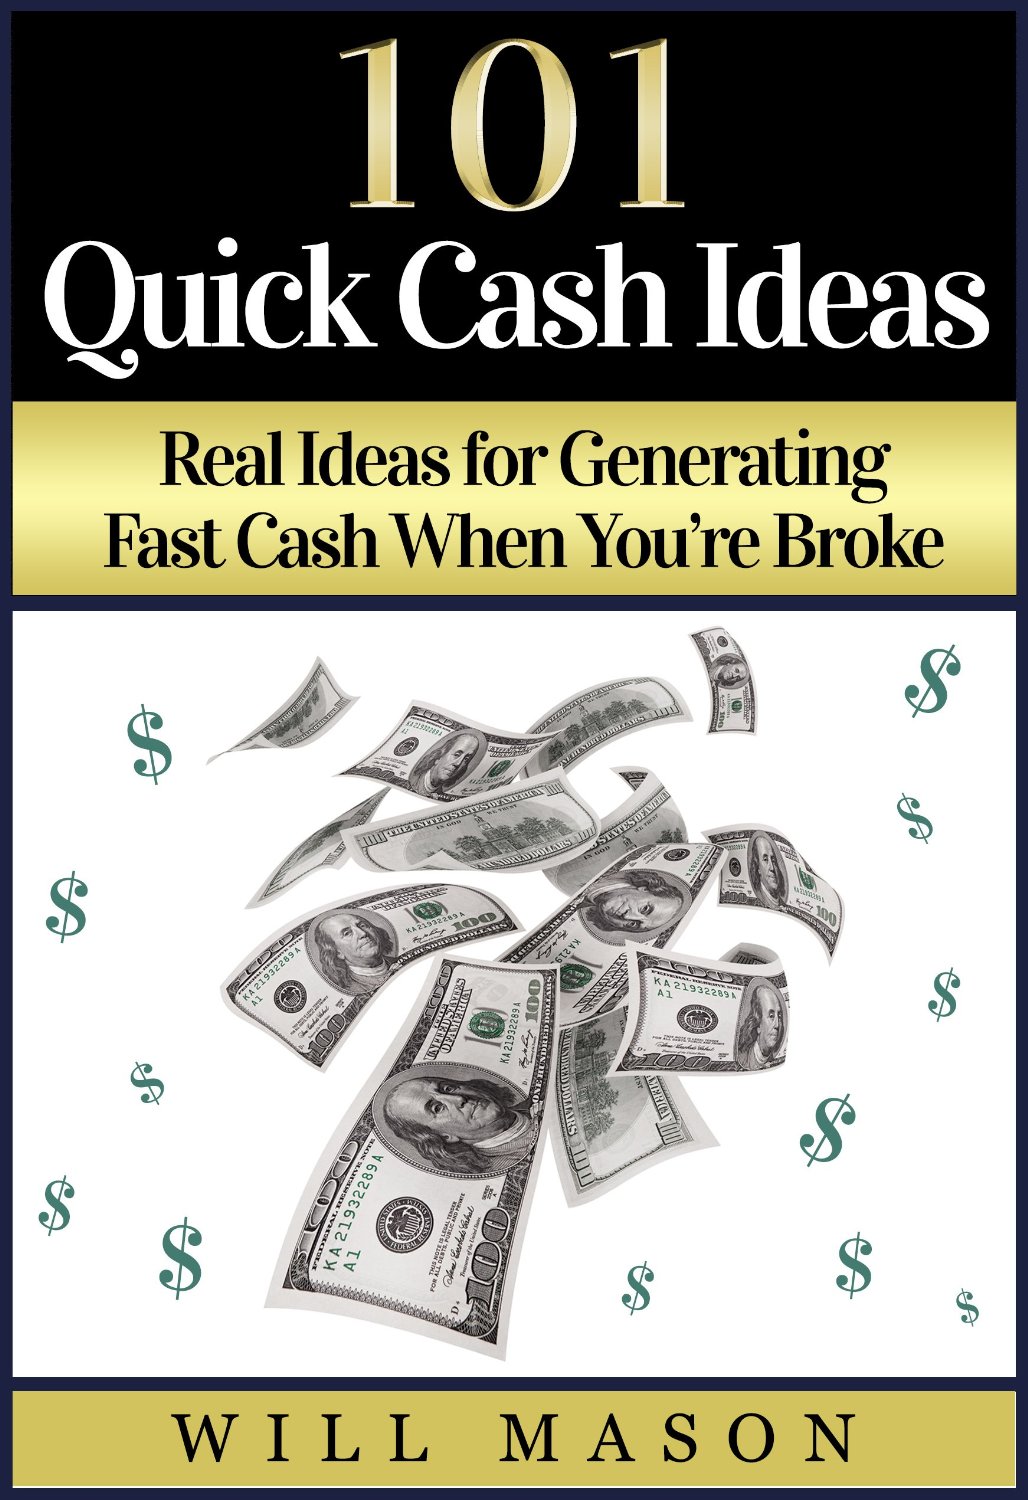 101 Quick Cash Ideas: Real Ideas for Generating Fast Cash When You’re Broke by Will Mason